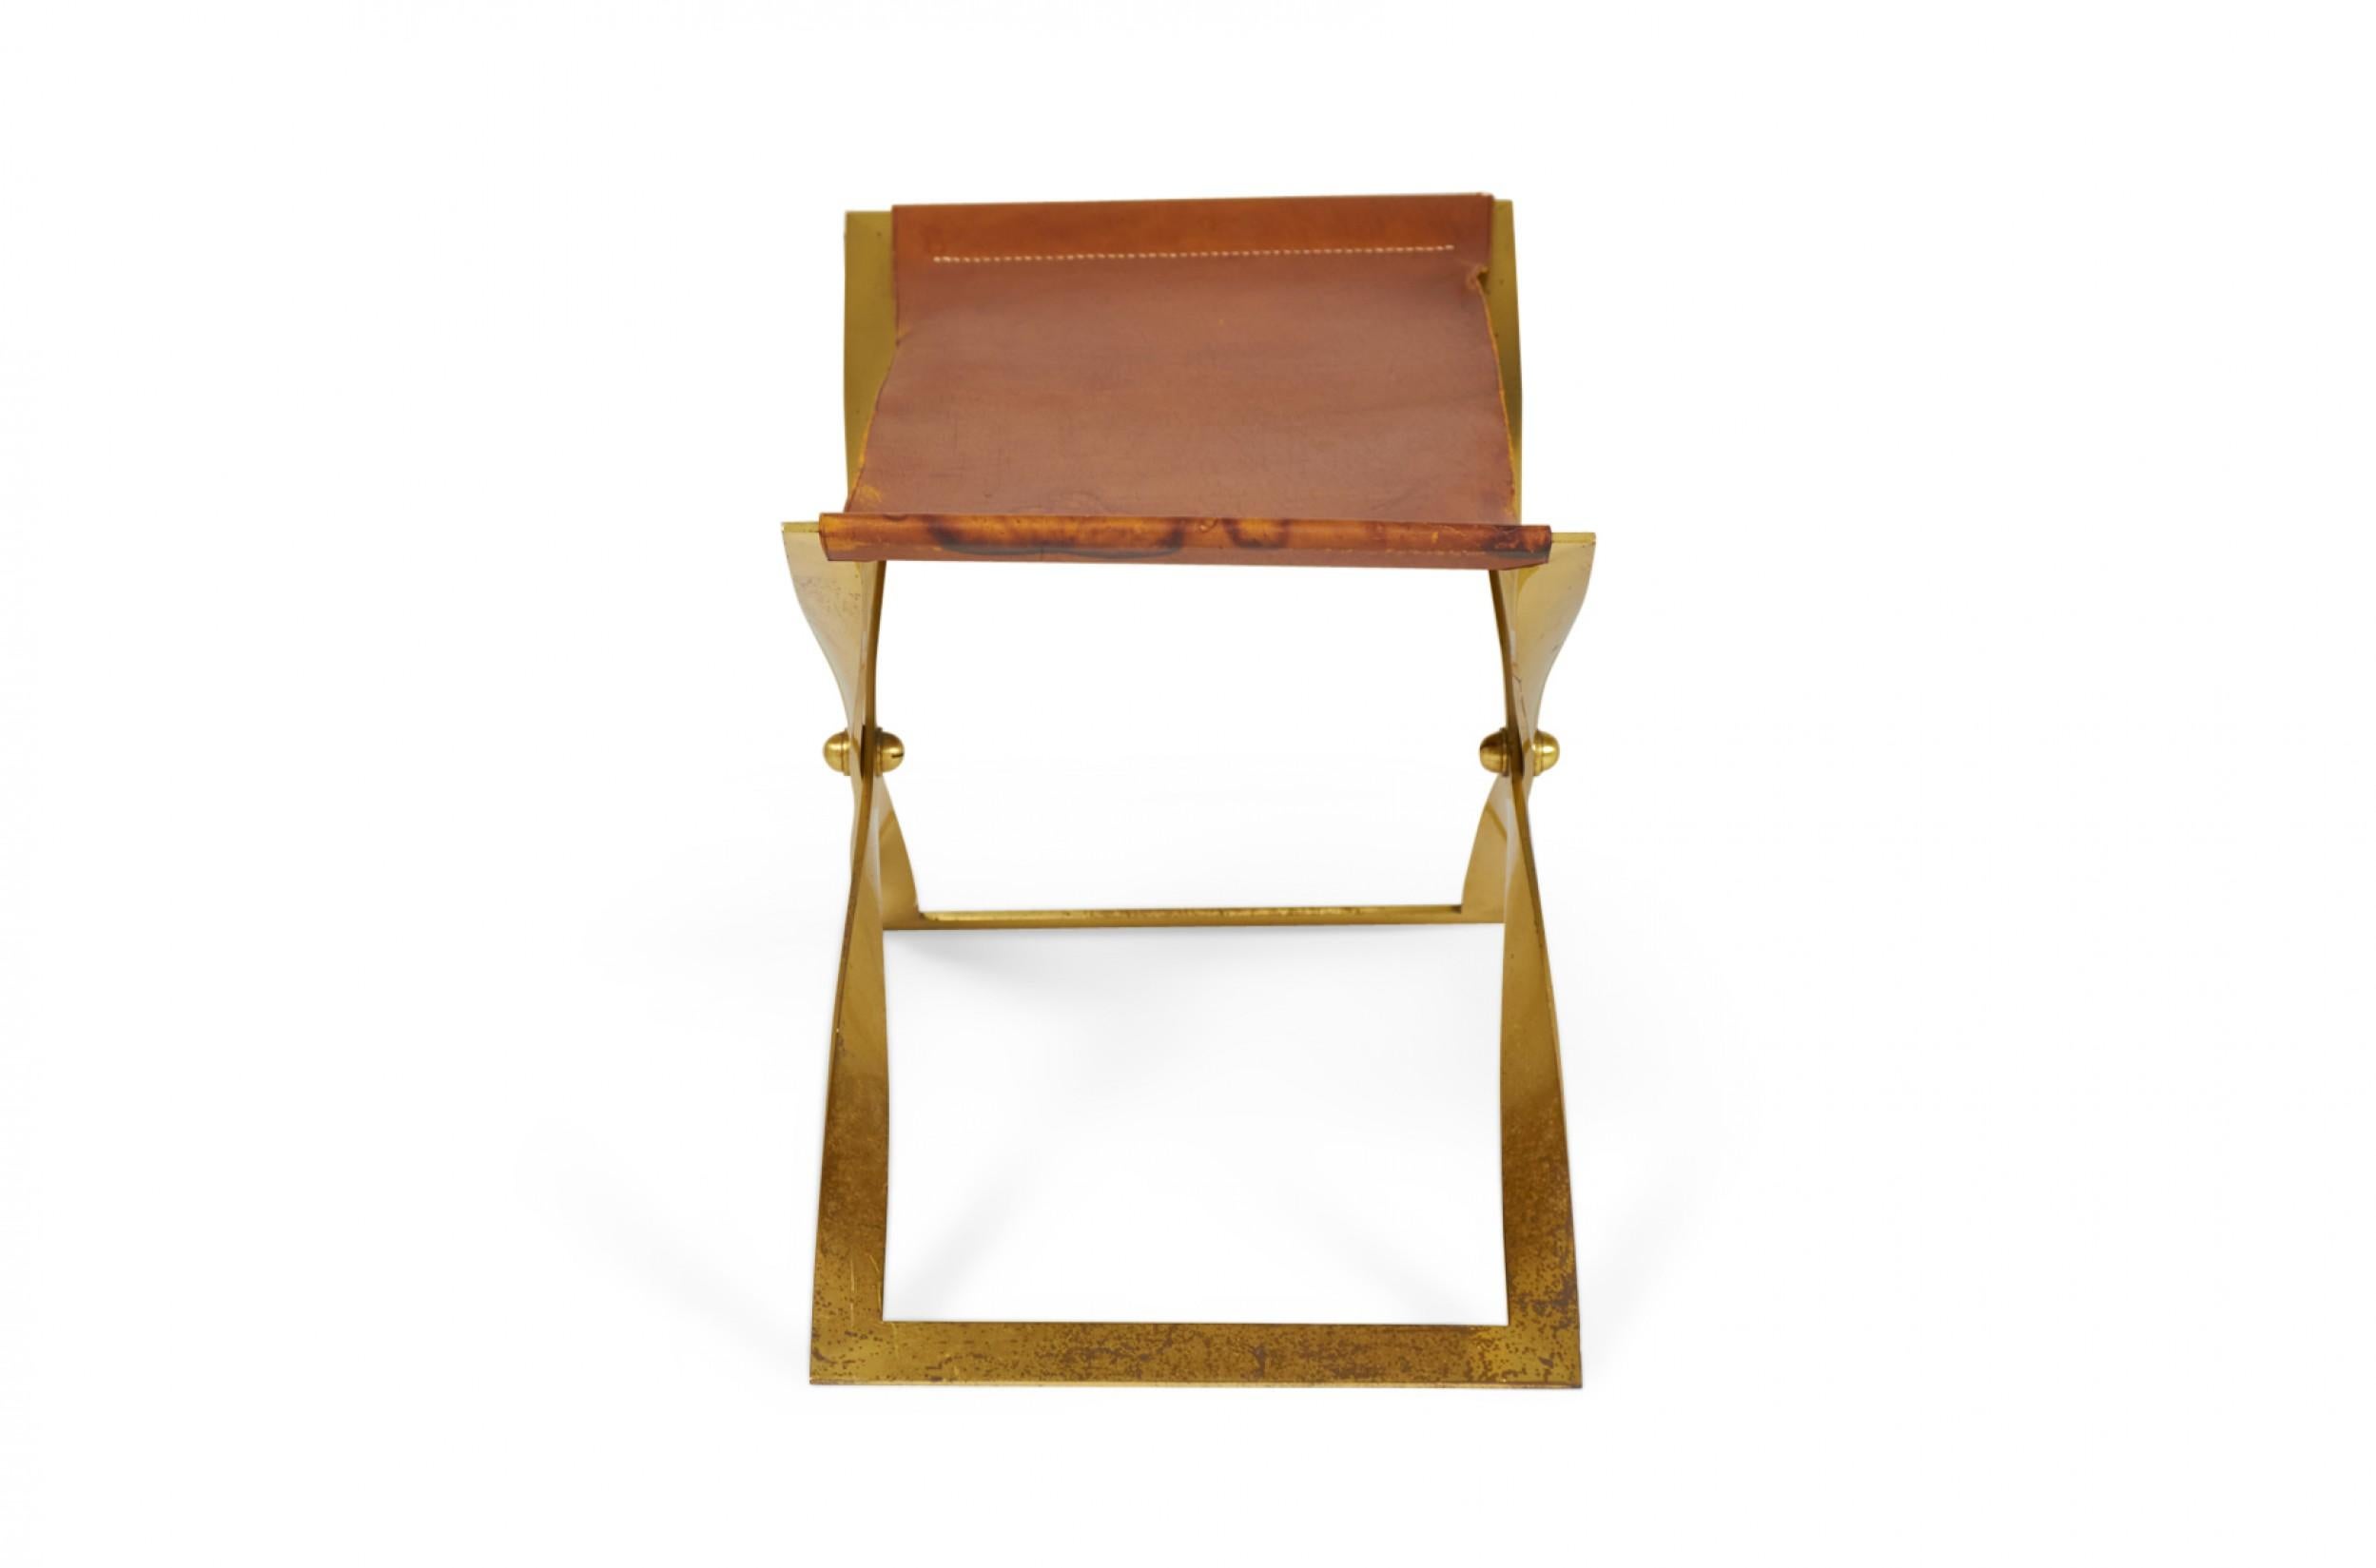 American Mid-Century scissor bench with a polished brass x-shaped frame and a brown leather sling seat.